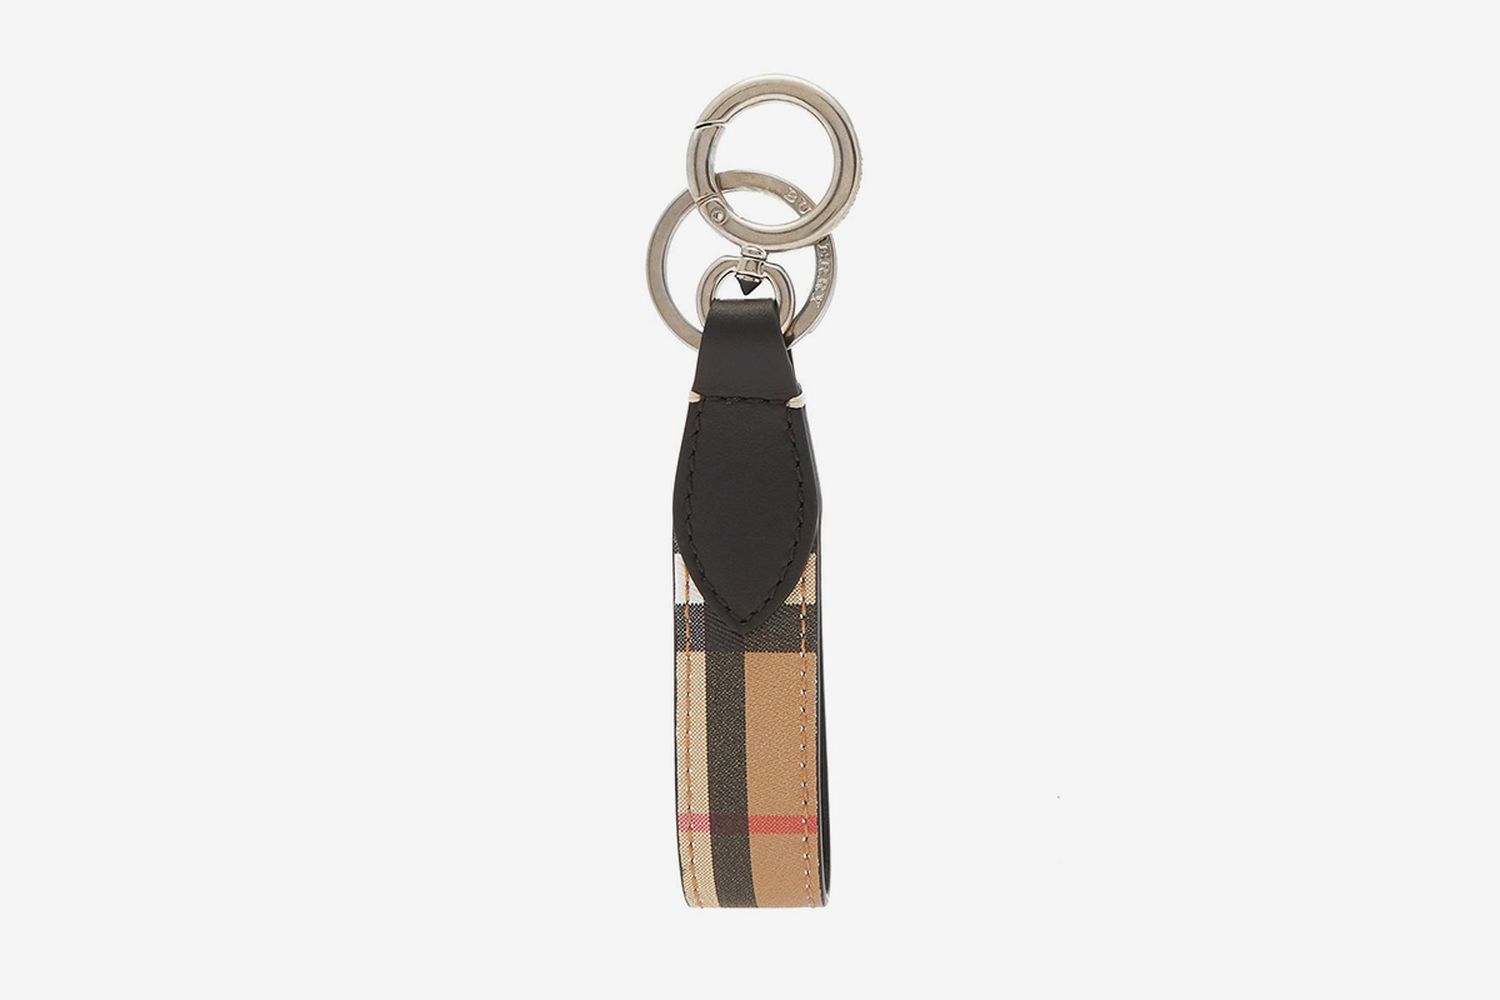 Vintage-Check Leather Key Ring